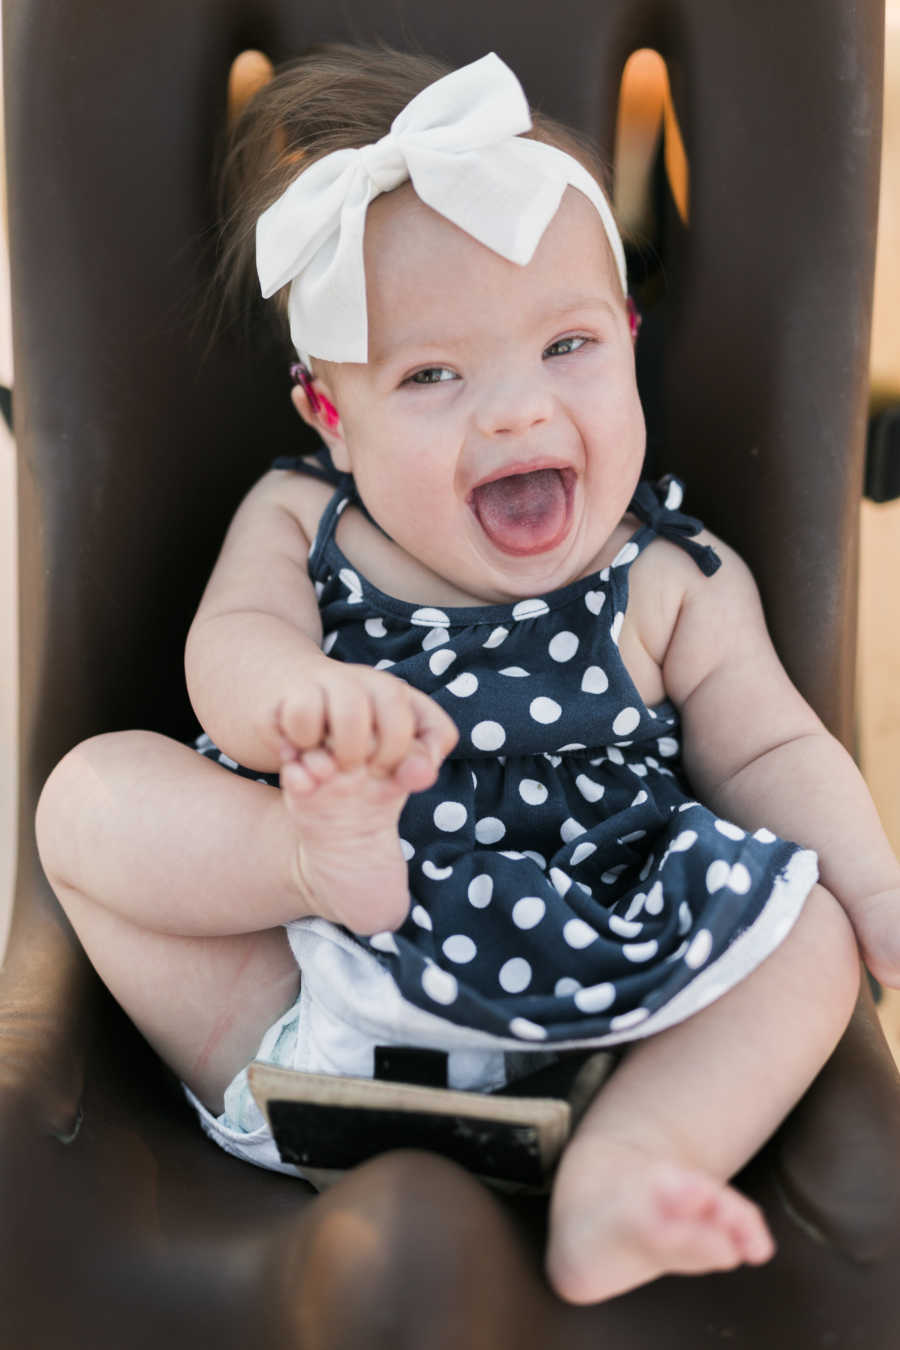 Baby with down syndrome and heart defect sits smiling holding onto her foot